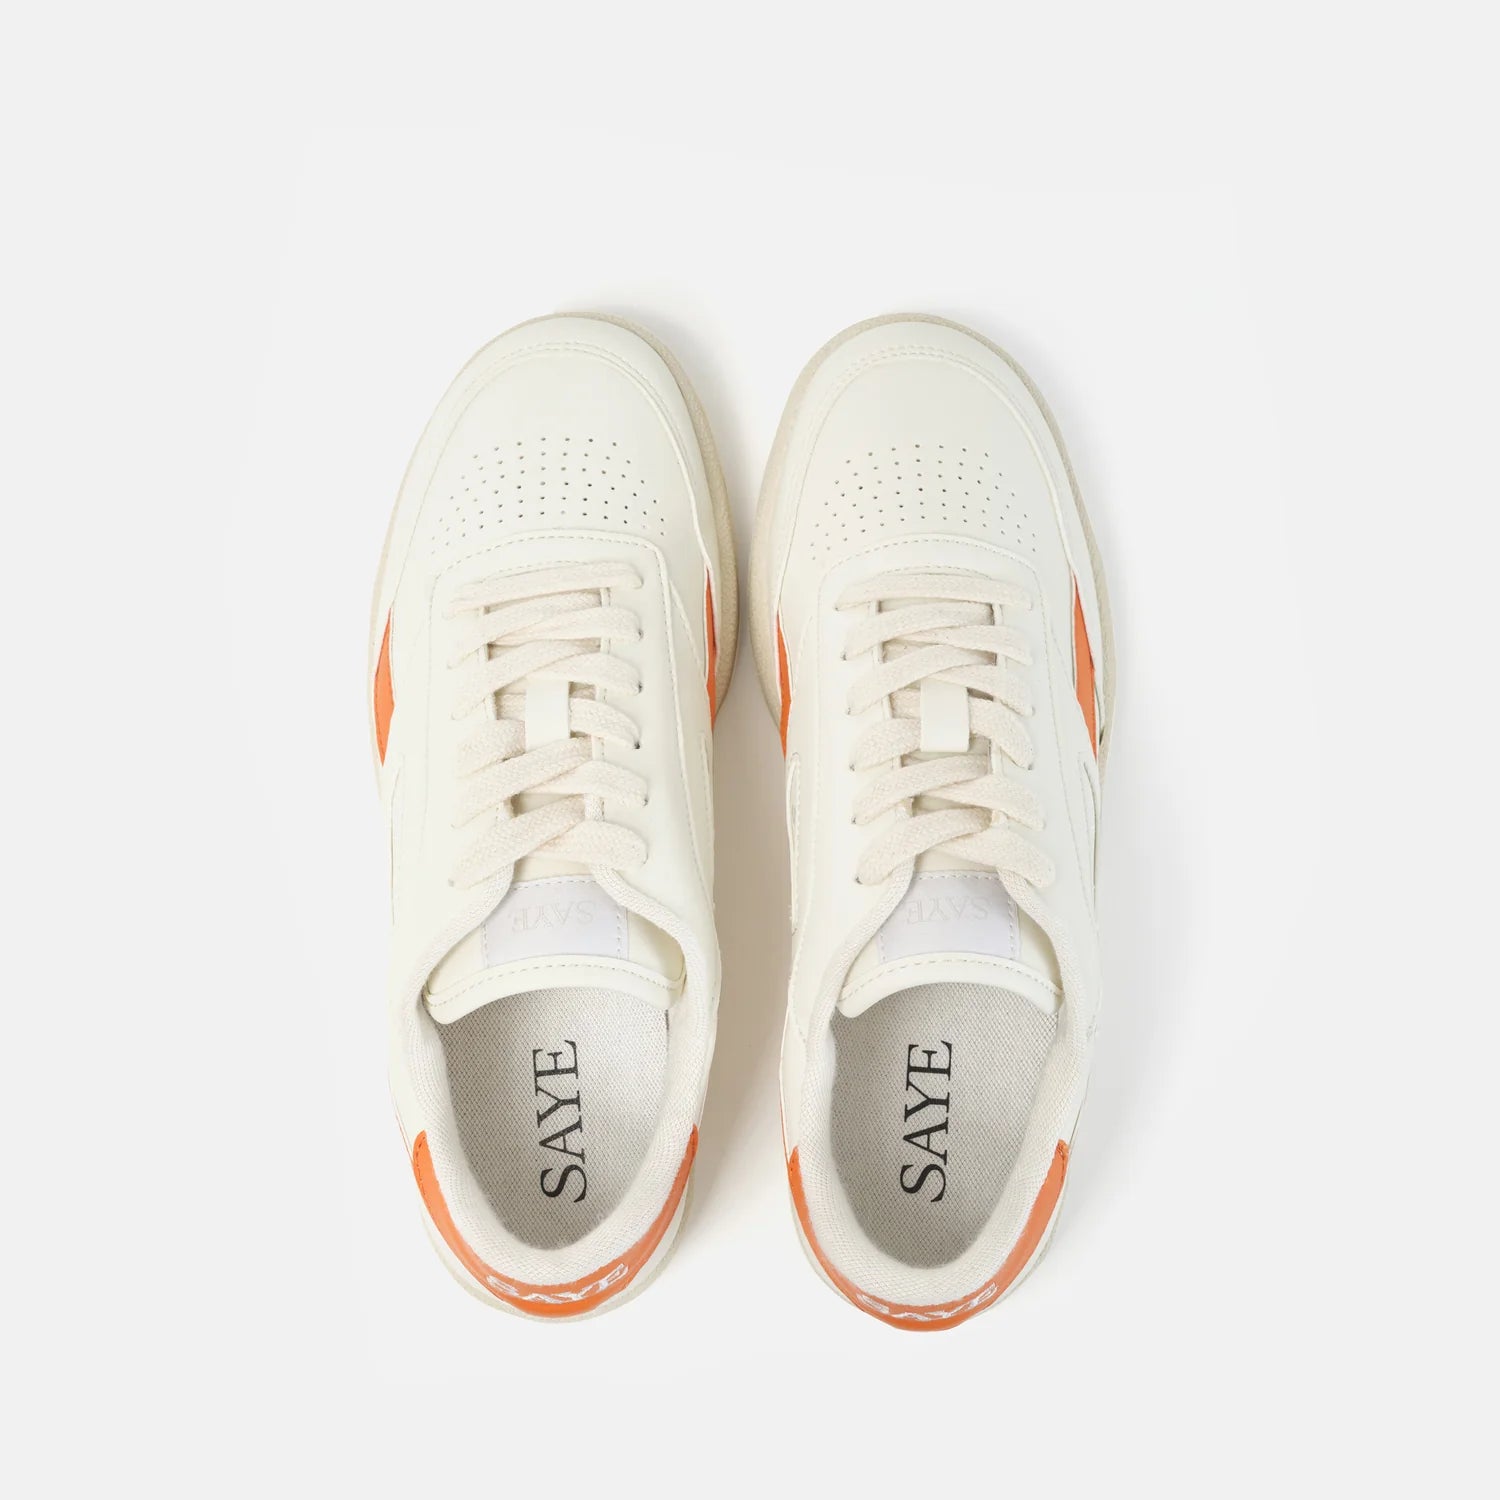 Pair of white SAYE 'Modelo '89 Sneakers - Orange' sneakers with orange accents, viewed from above.